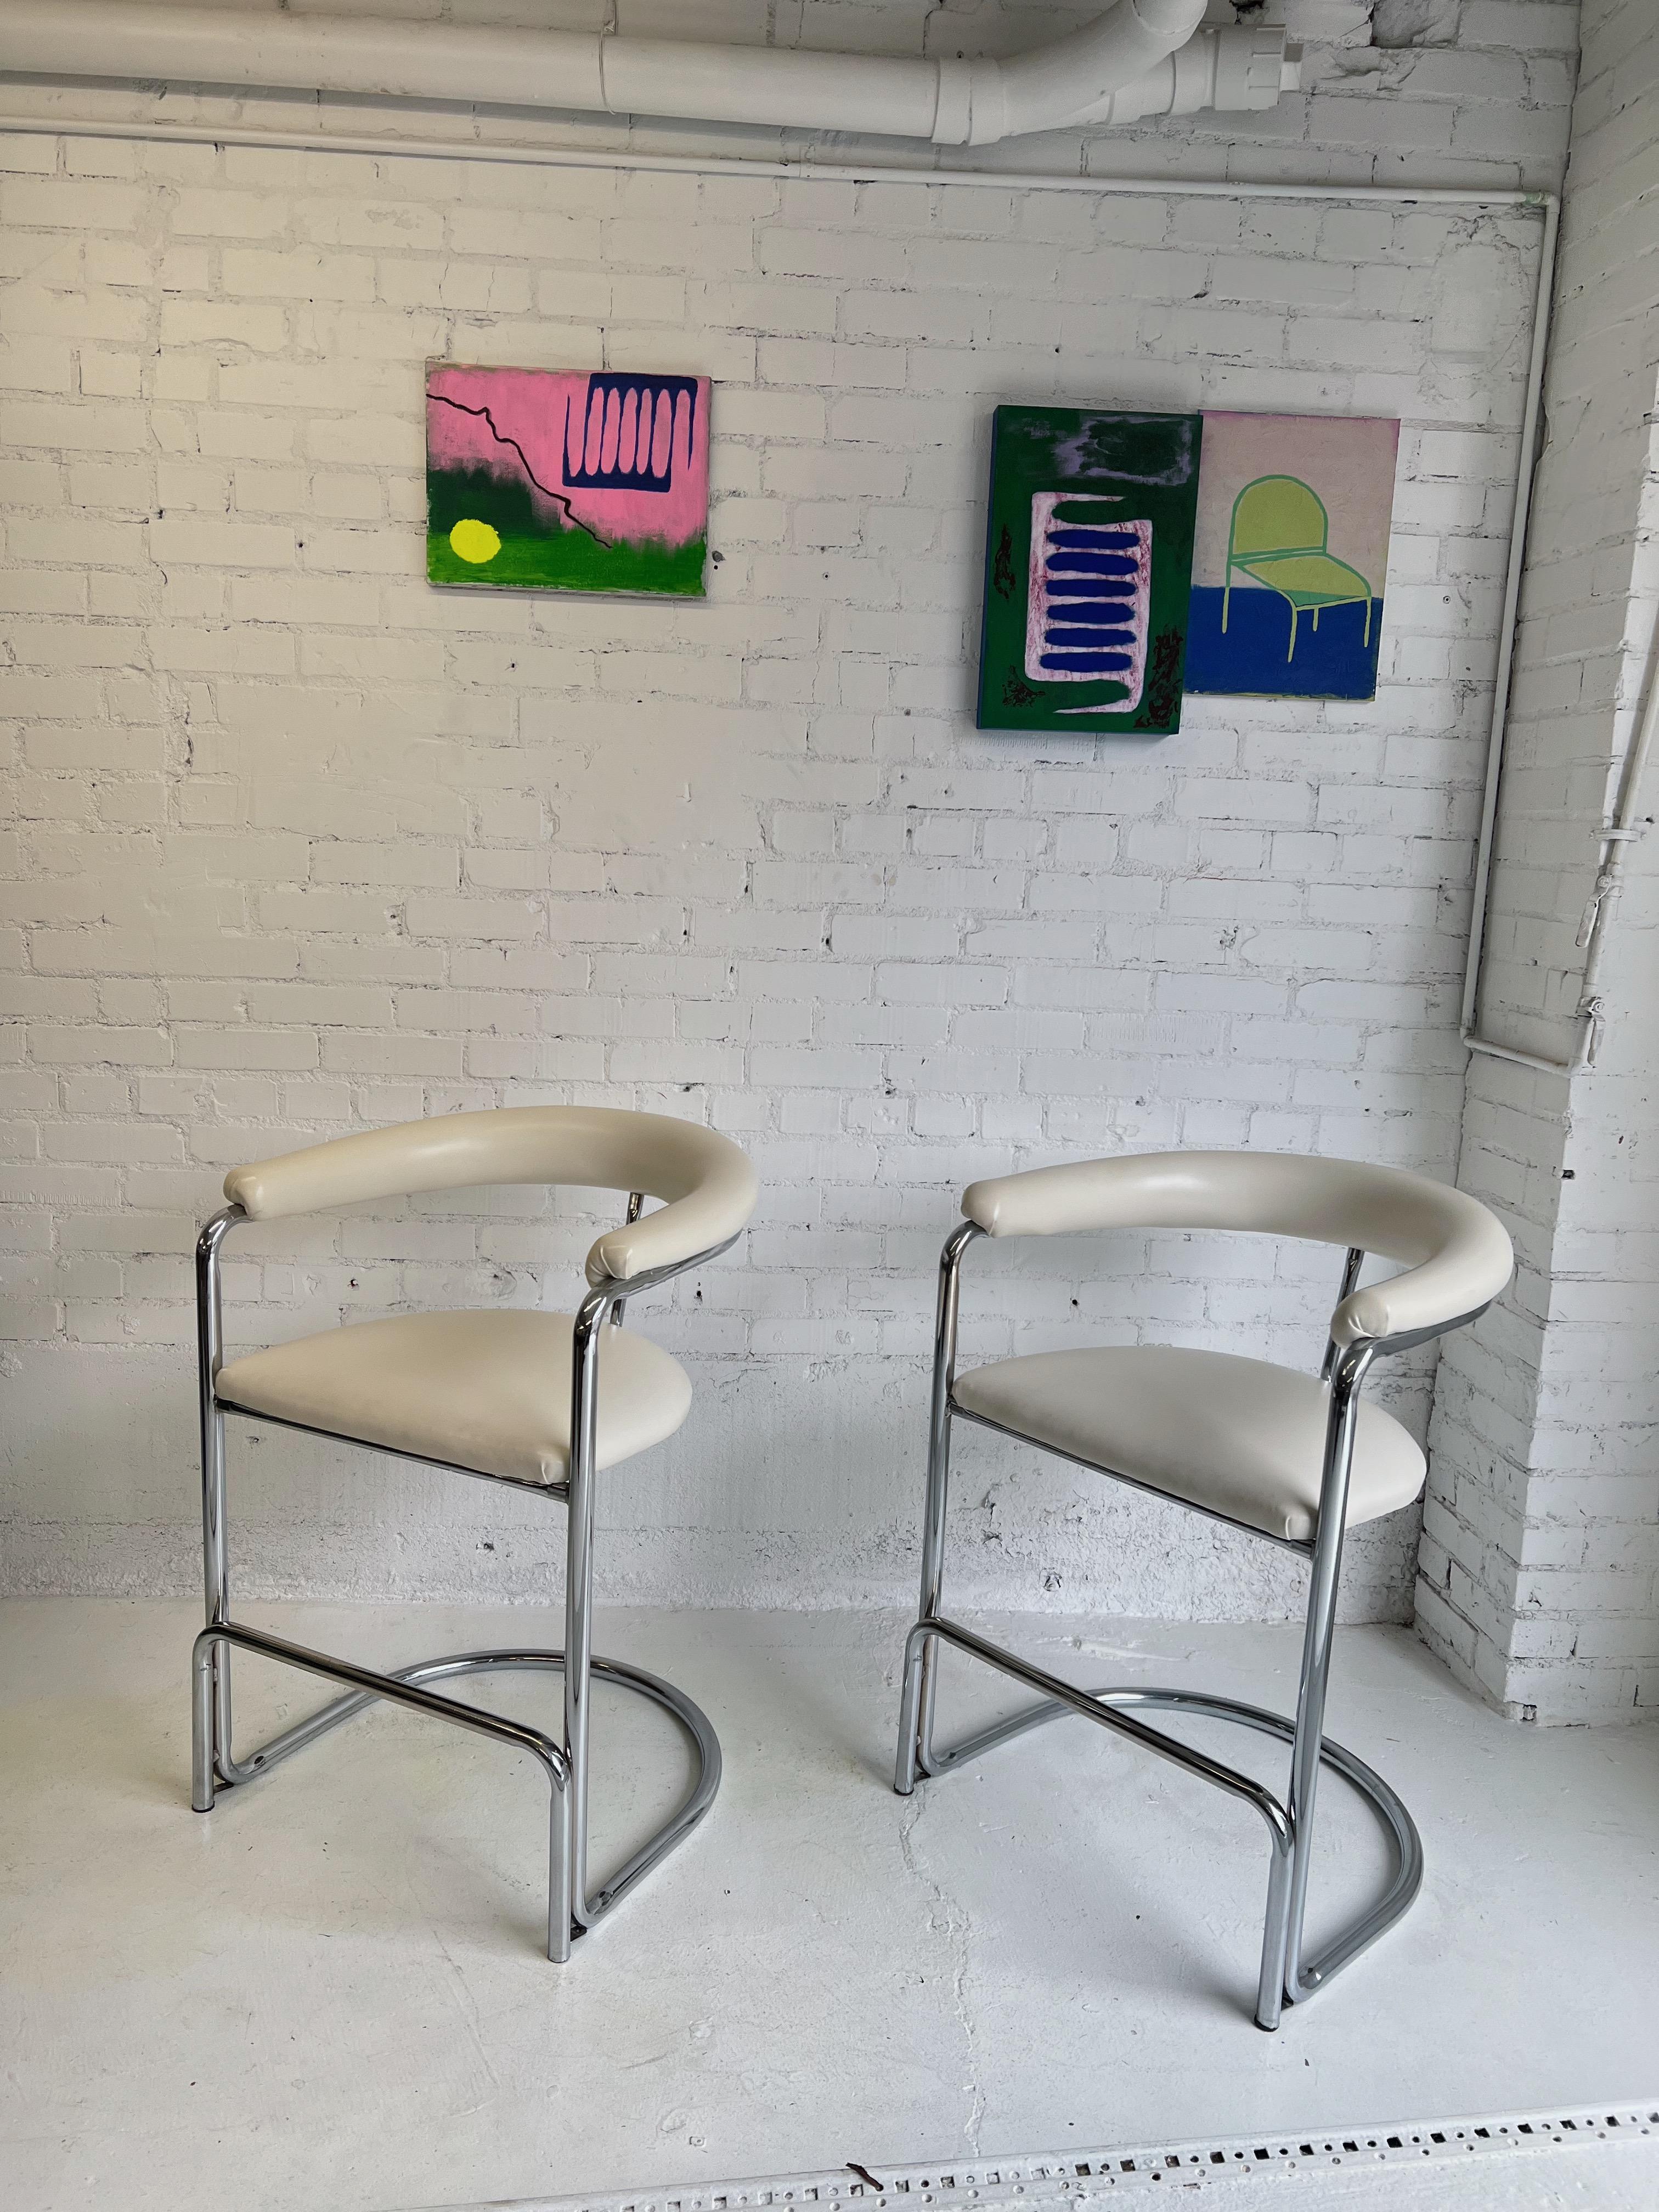 1980's Anton Lorenz Cantilever Chrome Barstools In Good Condition For Sale In Glendale, AZ